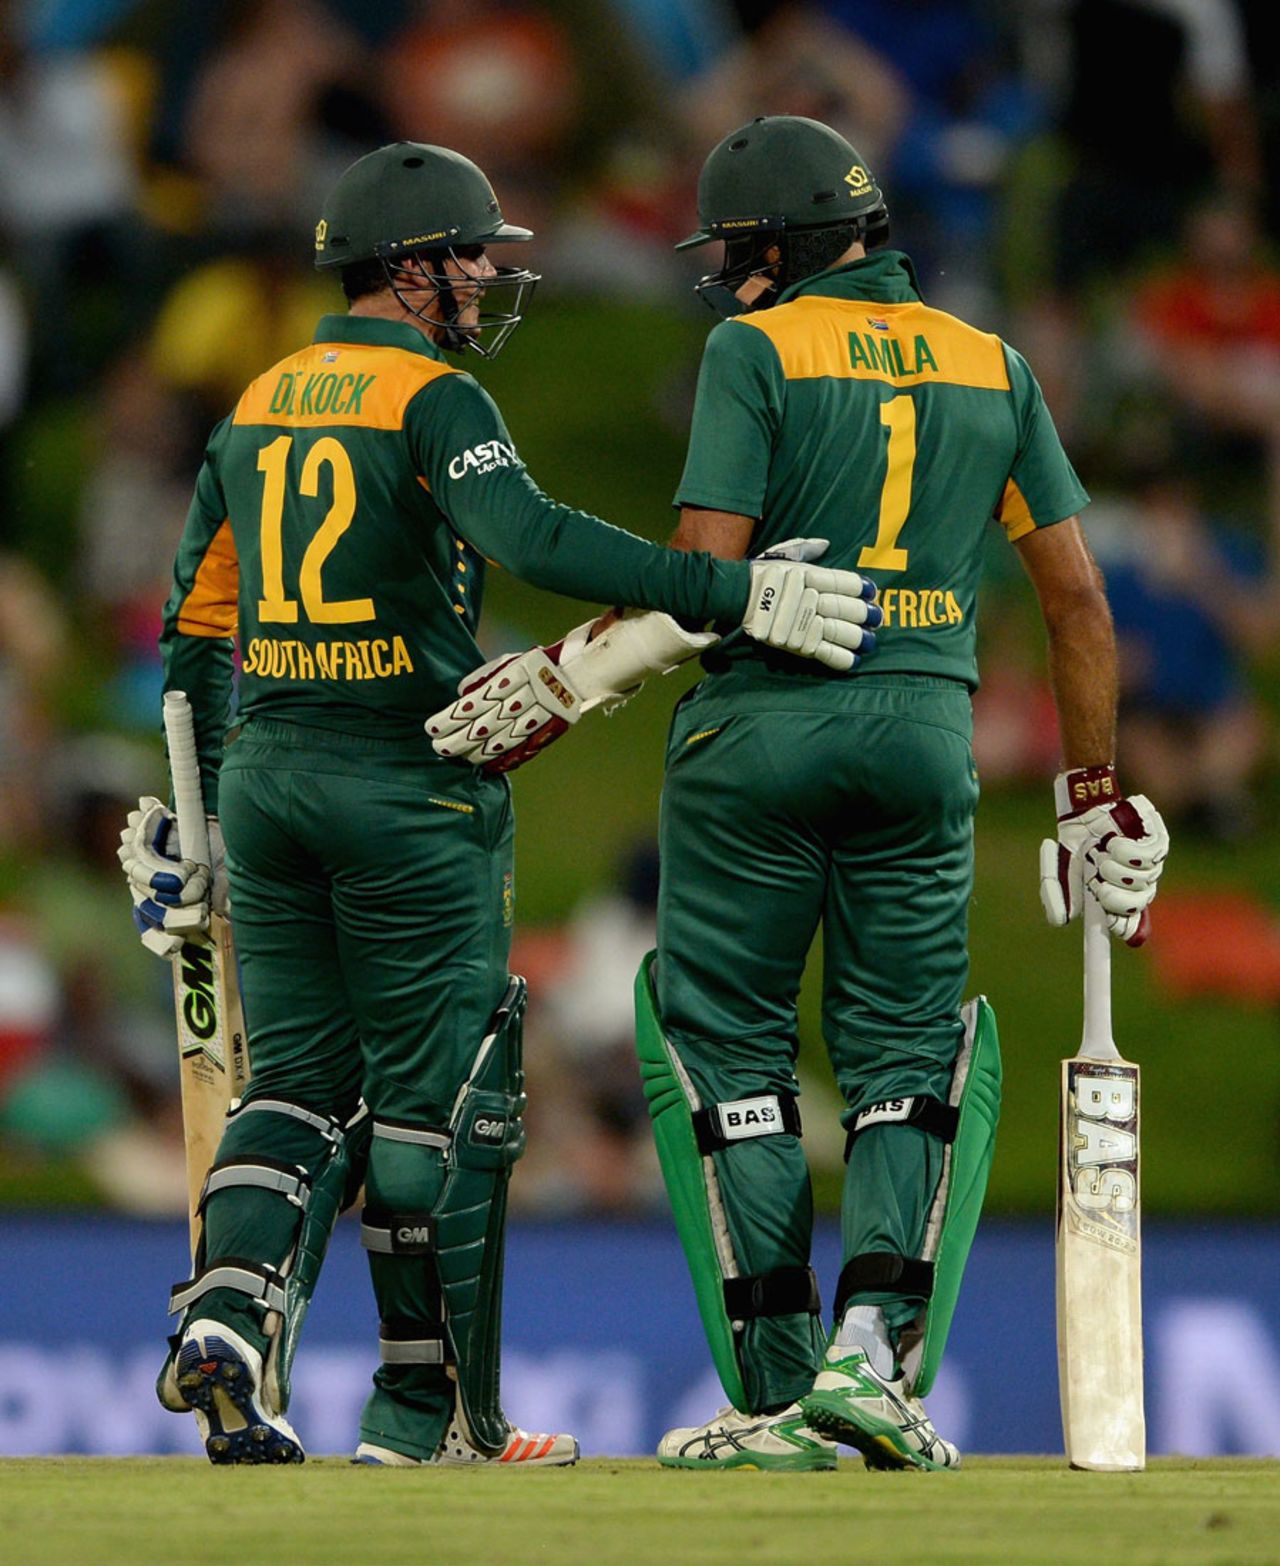 Quinton de Kock and Hashim Amla put on 239 for the first wicket, South Africa v England, 3rd ODI, Centurion, February 9, 2016